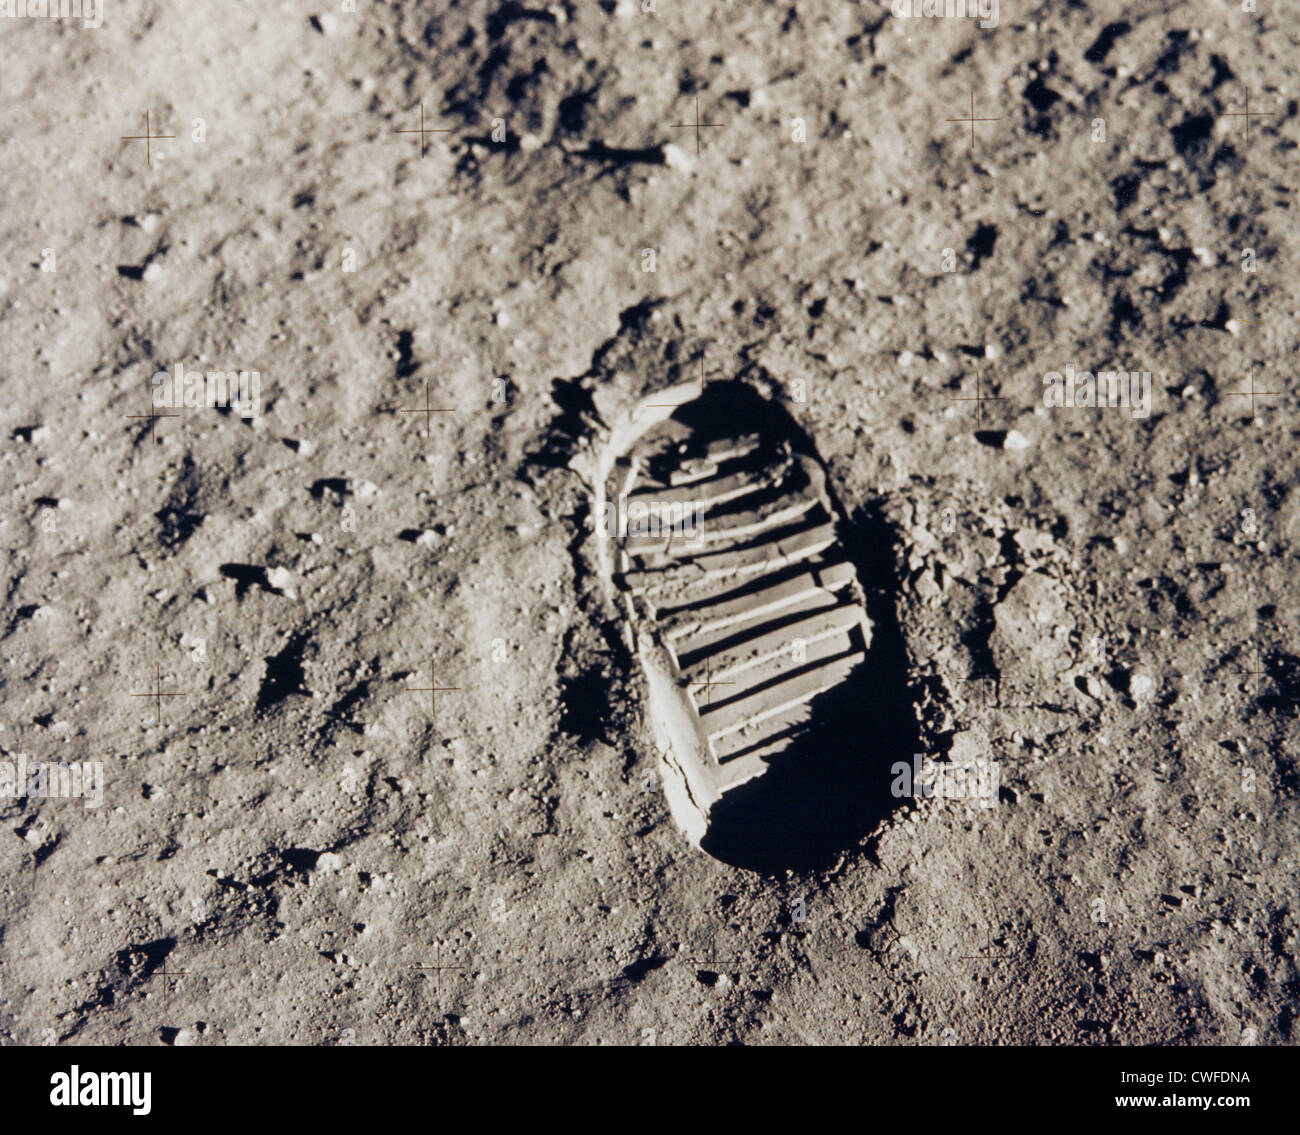 NASA Astronaut Neil Armstrong's photo showing Buzz Aldrin's boot print on the surface of the moon from the Apollo 11 mission module. Neil Armstrong and Buzz Aldrin became the first people to walk on the Moon on July 20, 1969. Stock Photo